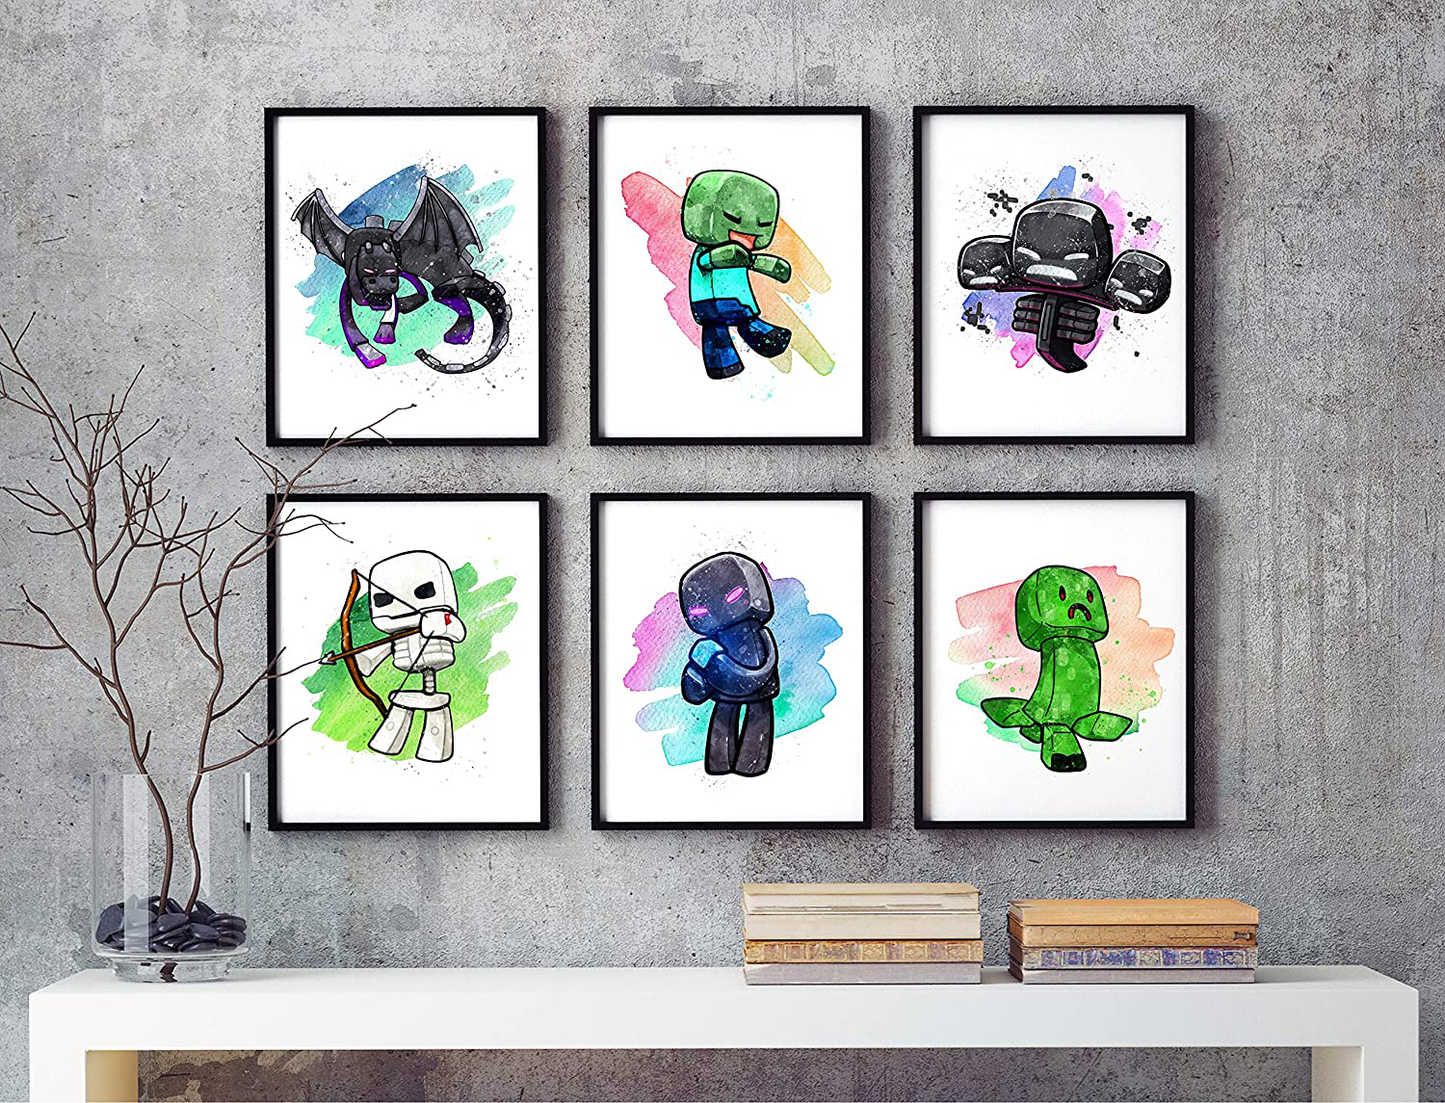 Miner Wall Poster Pixel Mine Posters for Boys Room – Mining Gamer Themed Wall Art Decor – Unframed Set of 6 Prints, 8x10 Inch, Unique Watercolor Painted Gaming Wall Art Room Decor for Boys, Teens, Kids Bedroom, Game Room, Playroom, Teen Room Decor